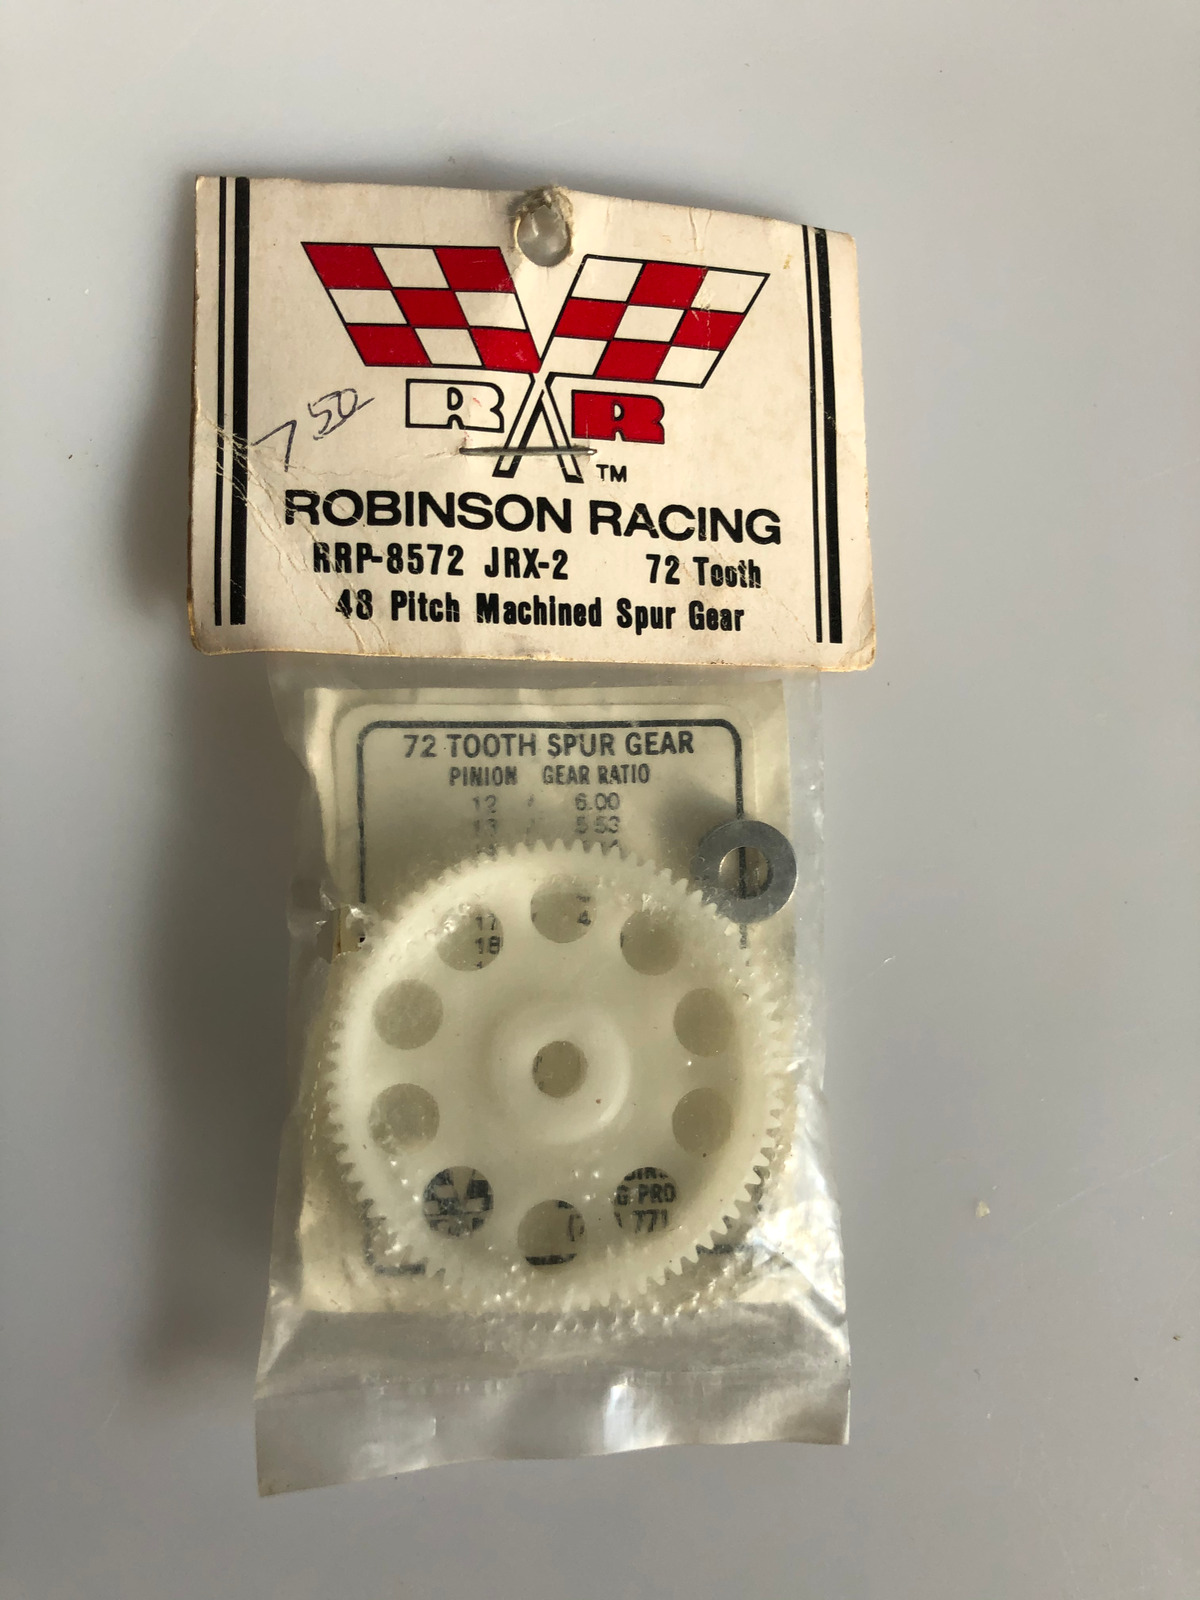 Robinson Racing JRX-2 72 Tooth 48 Pitch Machined Spur Gear RRP8572